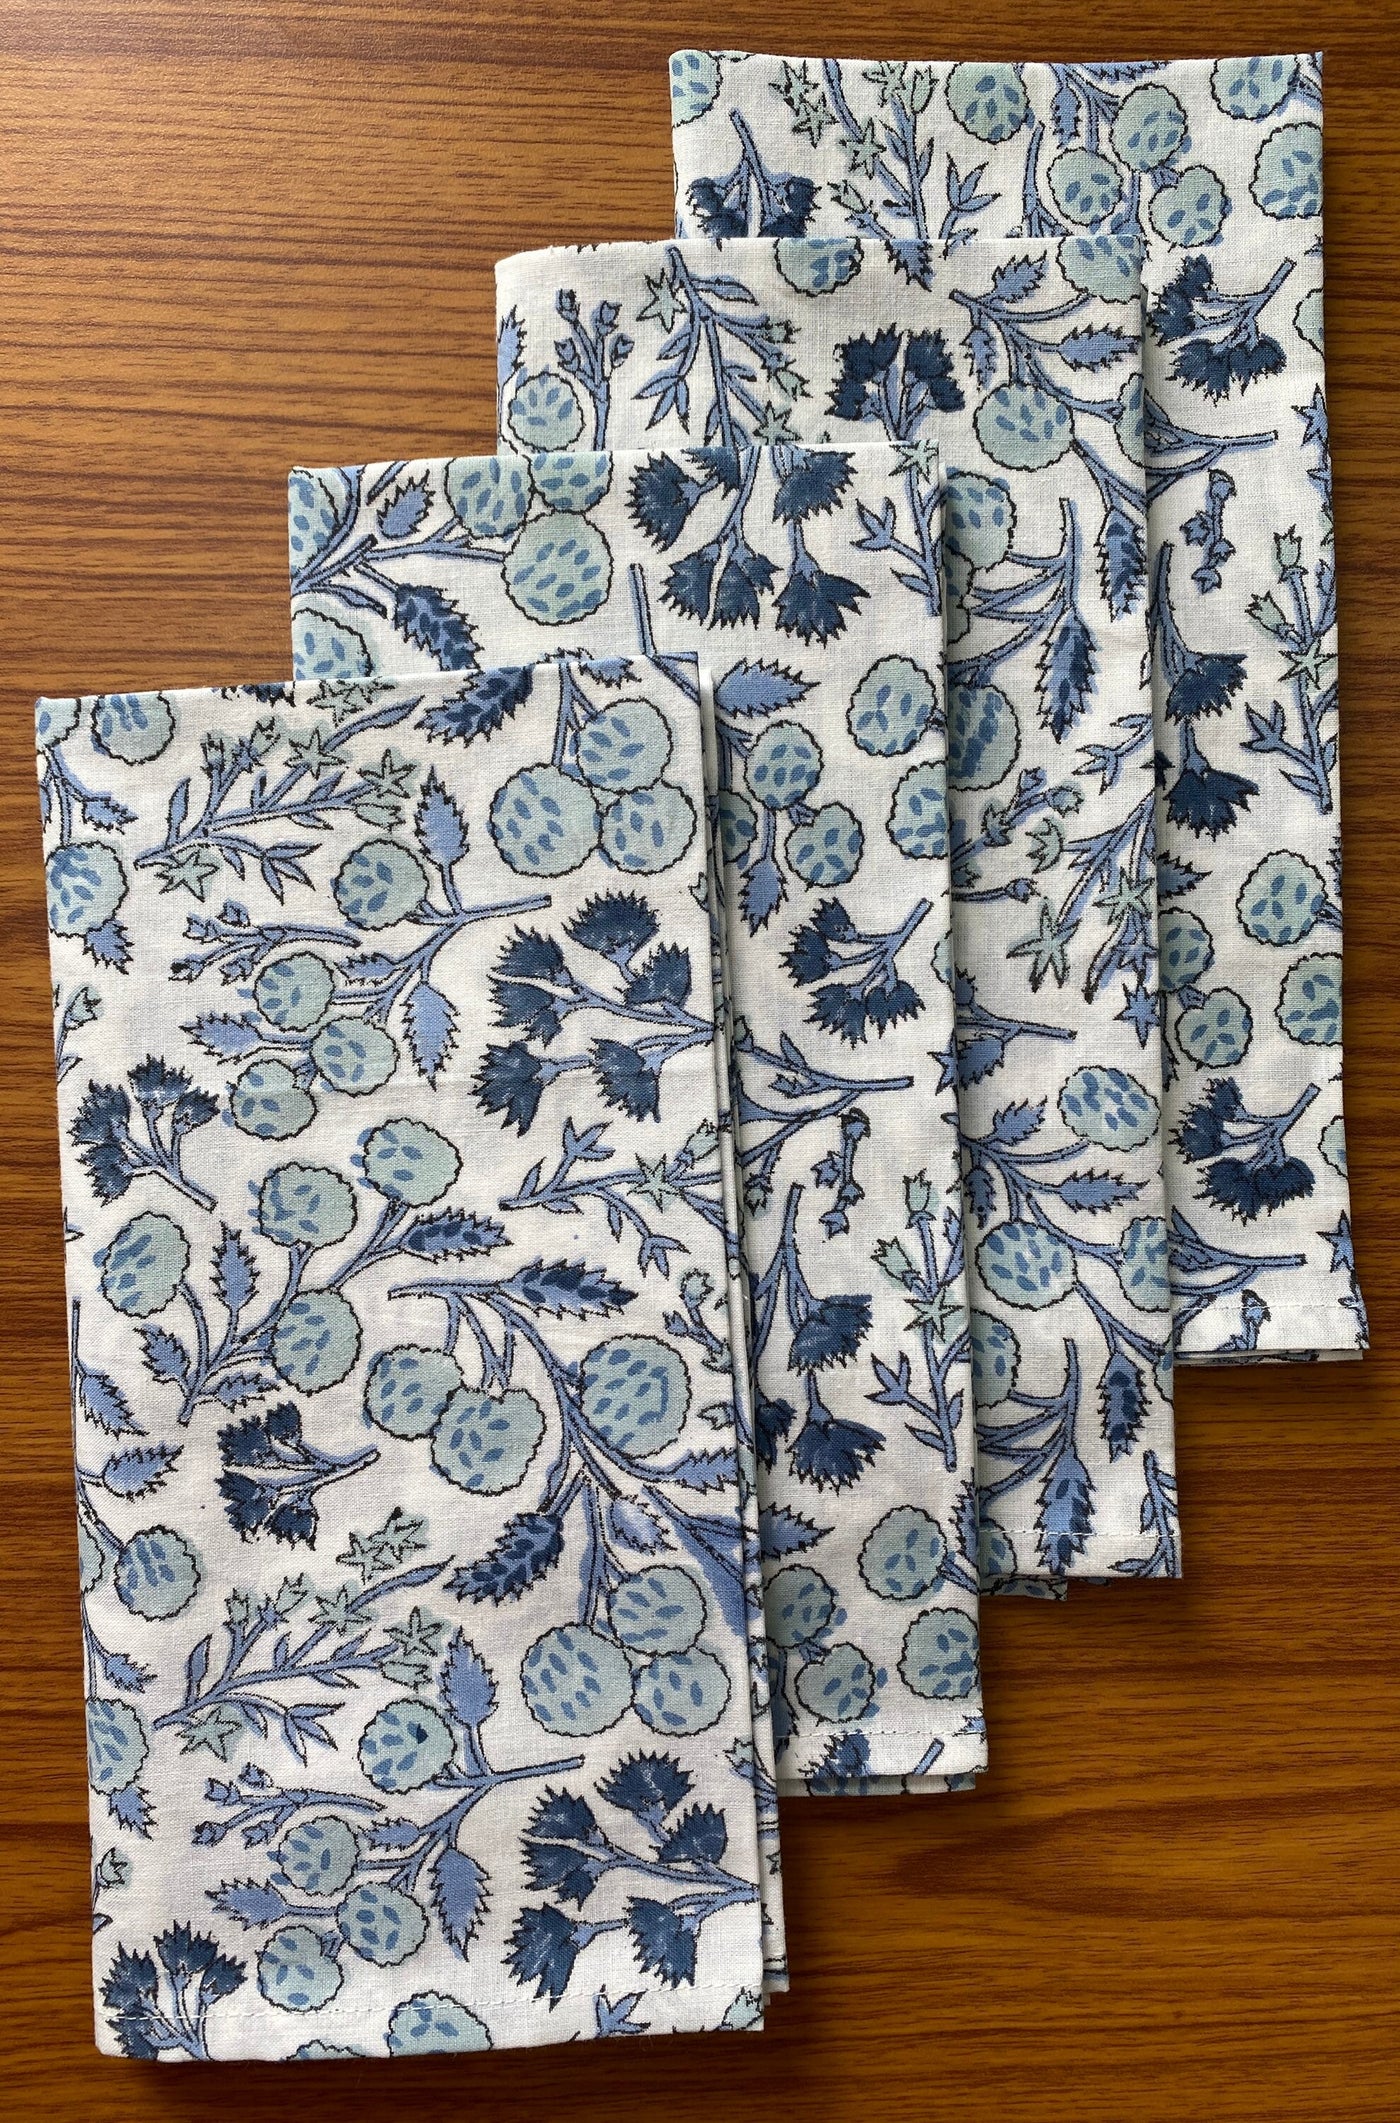 Fabricrush Denim and Baby Blue on White Indian Hand Block Floral Printed 100% Pure Cotton Cloth Napkins, 18x18"- Cocktail Napkins, 20x20"- Dinner Napkins